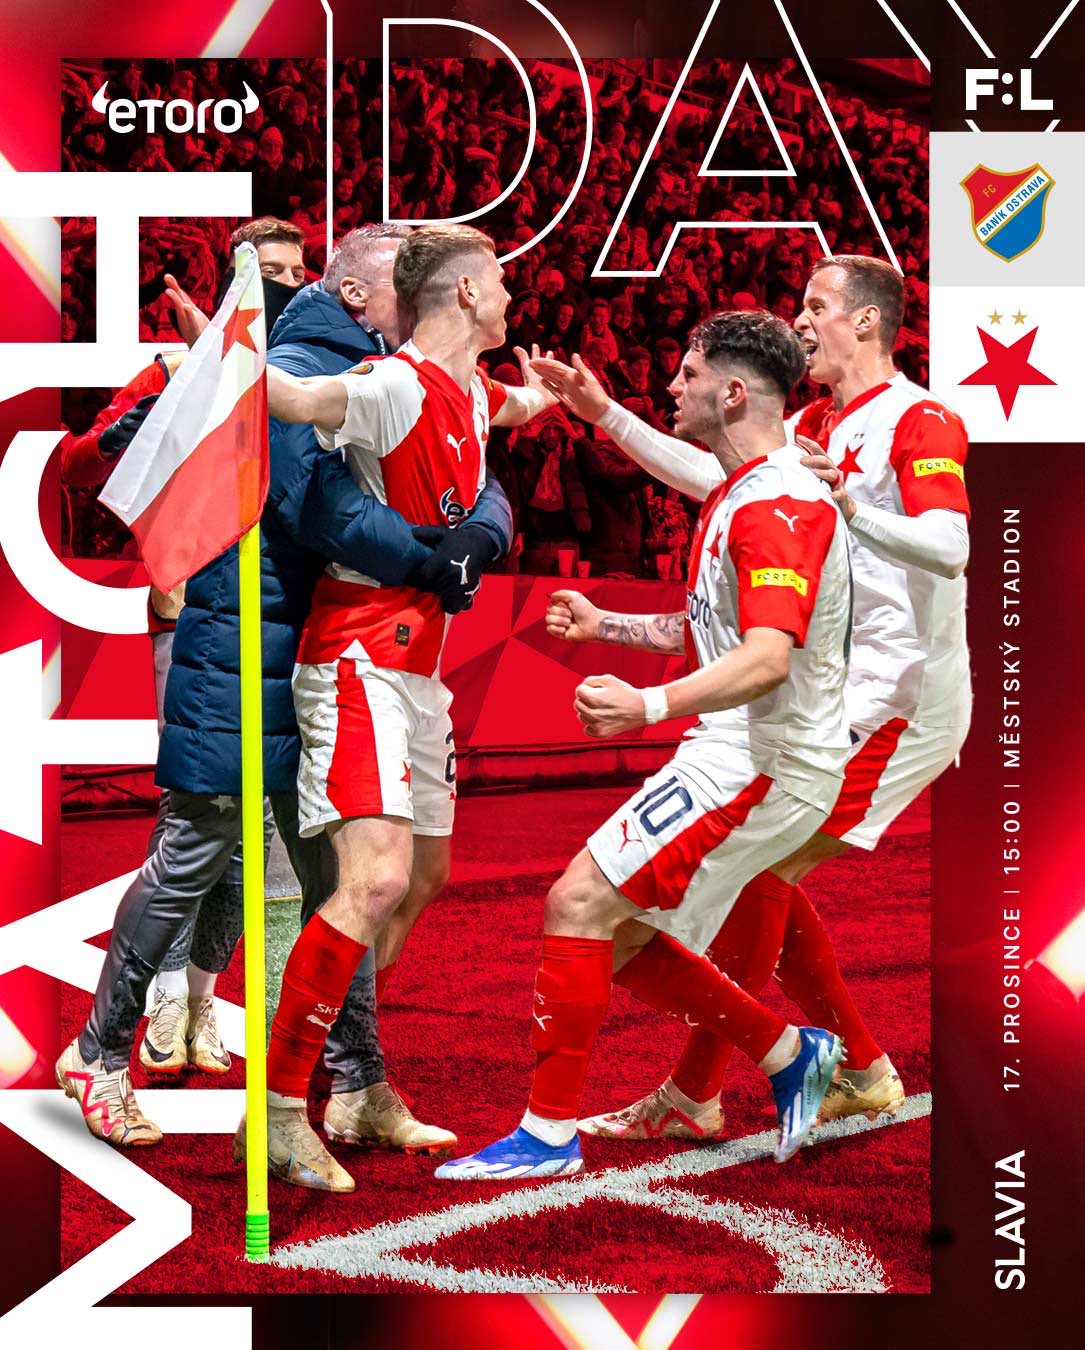 The 𝙊𝙛𝙛𝙞𝙘𝙞𝙖𝙡 𝙇𝙪𝙣𝙘𝙝 with SK Slavia Praha Thank you for